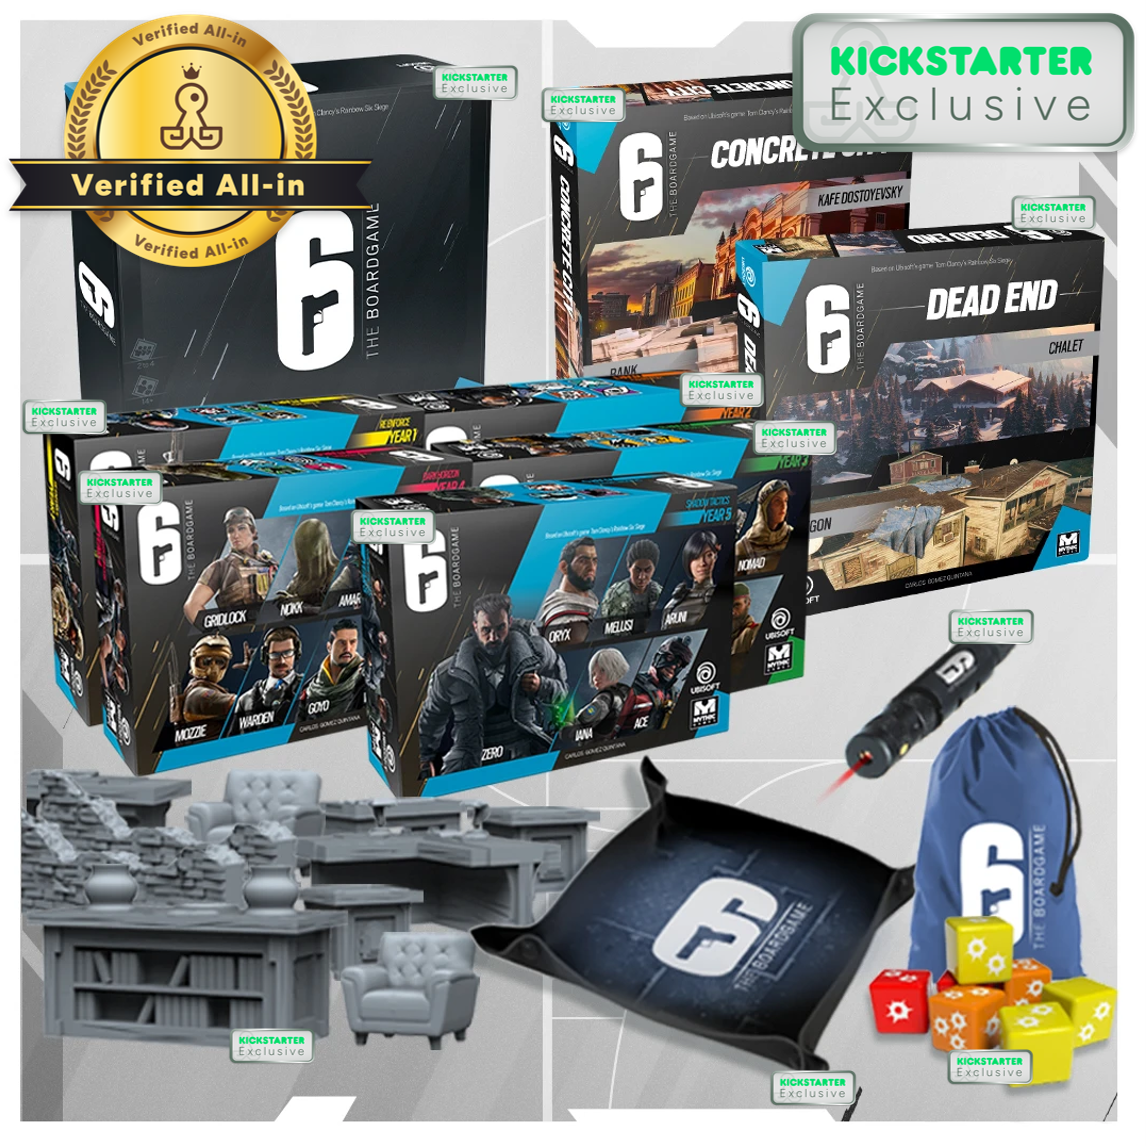 6: Siege - The Board Game Verified Smooth Operator All-In (Includes All Kickstarter Exclusive Content)